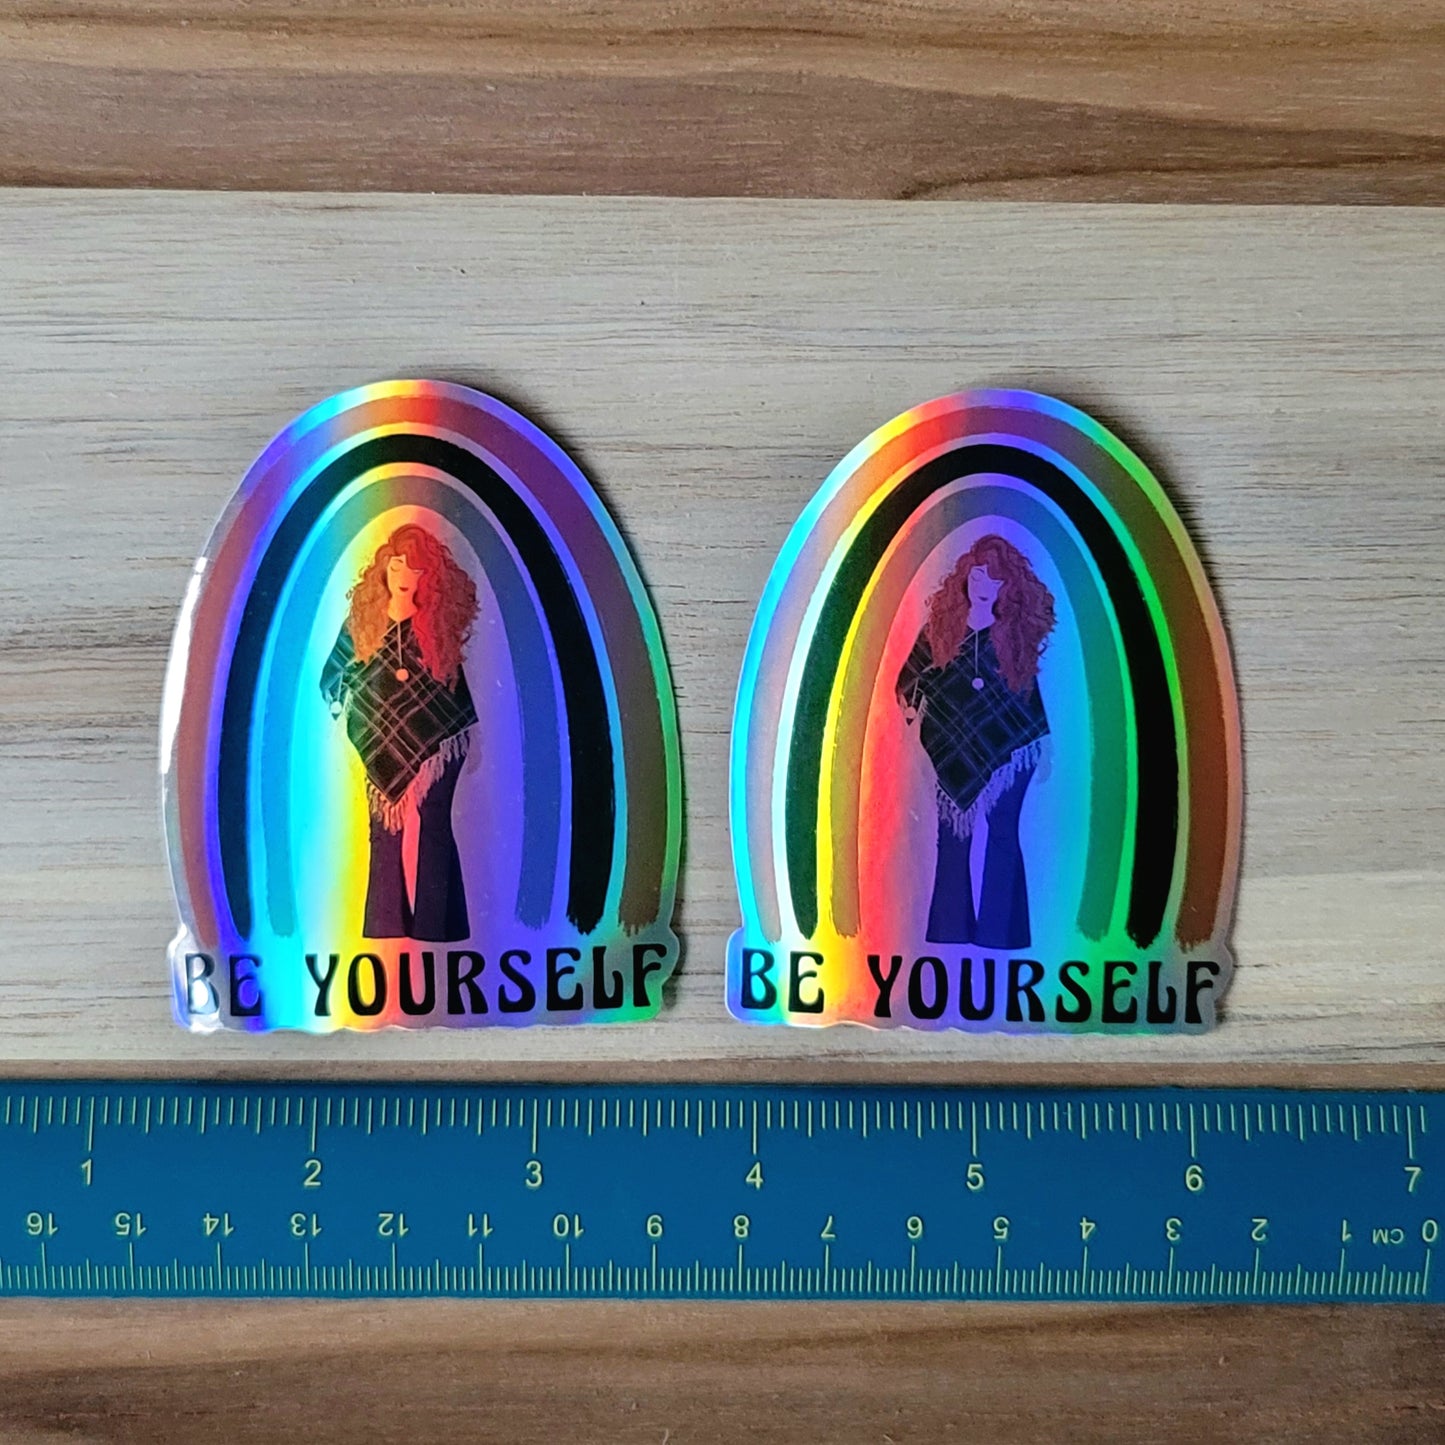 IN STOCK: Sticker Be Yourself